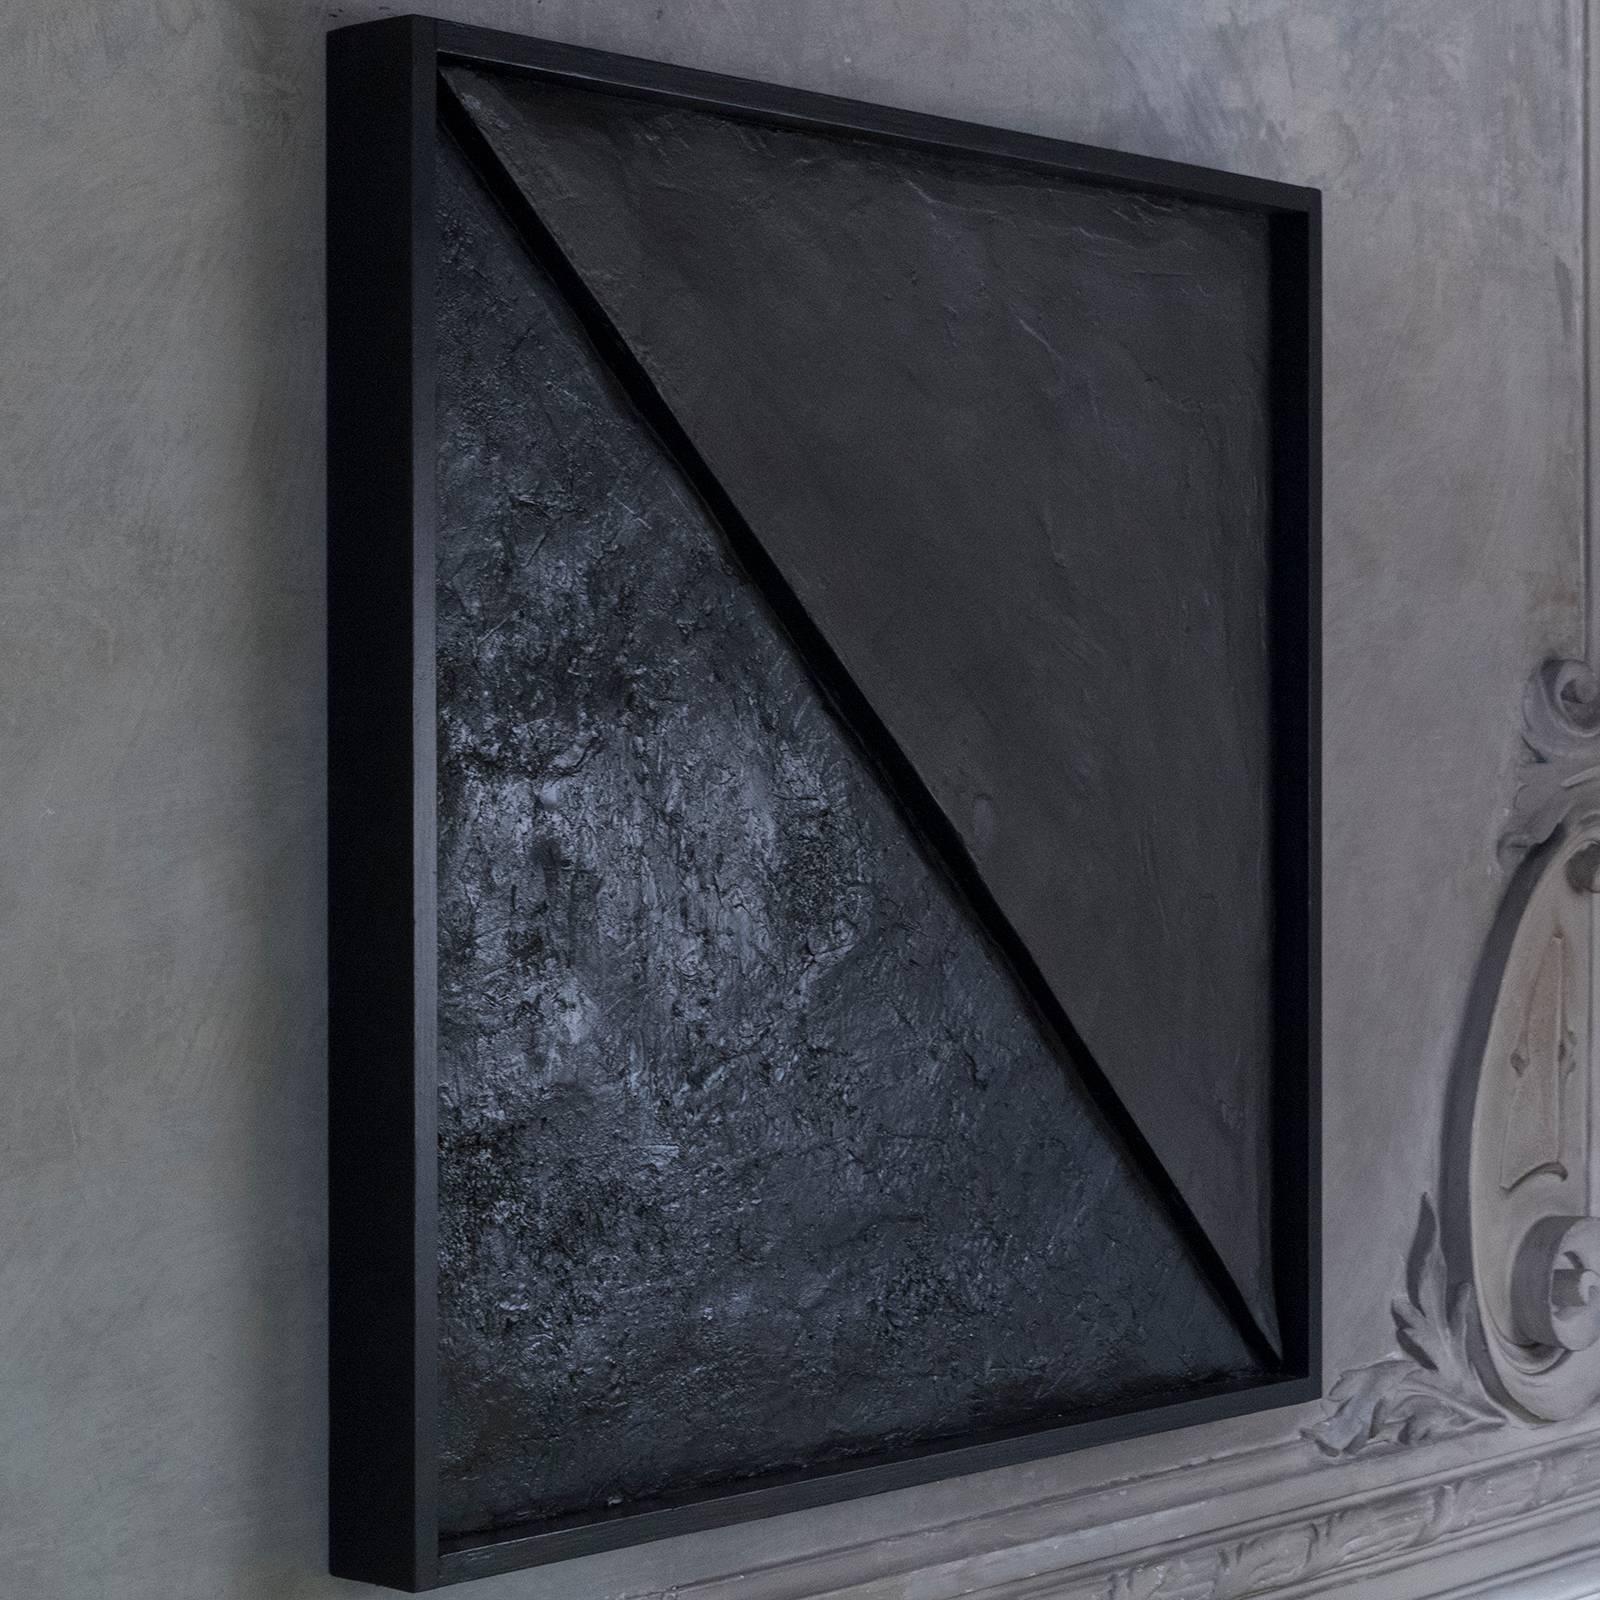 Black abstract painting on wood, plaster and acrylics, Andrea Brandi 2013,

With great sensitivity Andrea Brandi combines natural and synthetic elements, layers of pure pigment and objects of recovery, to obtain sculptural paintings with an